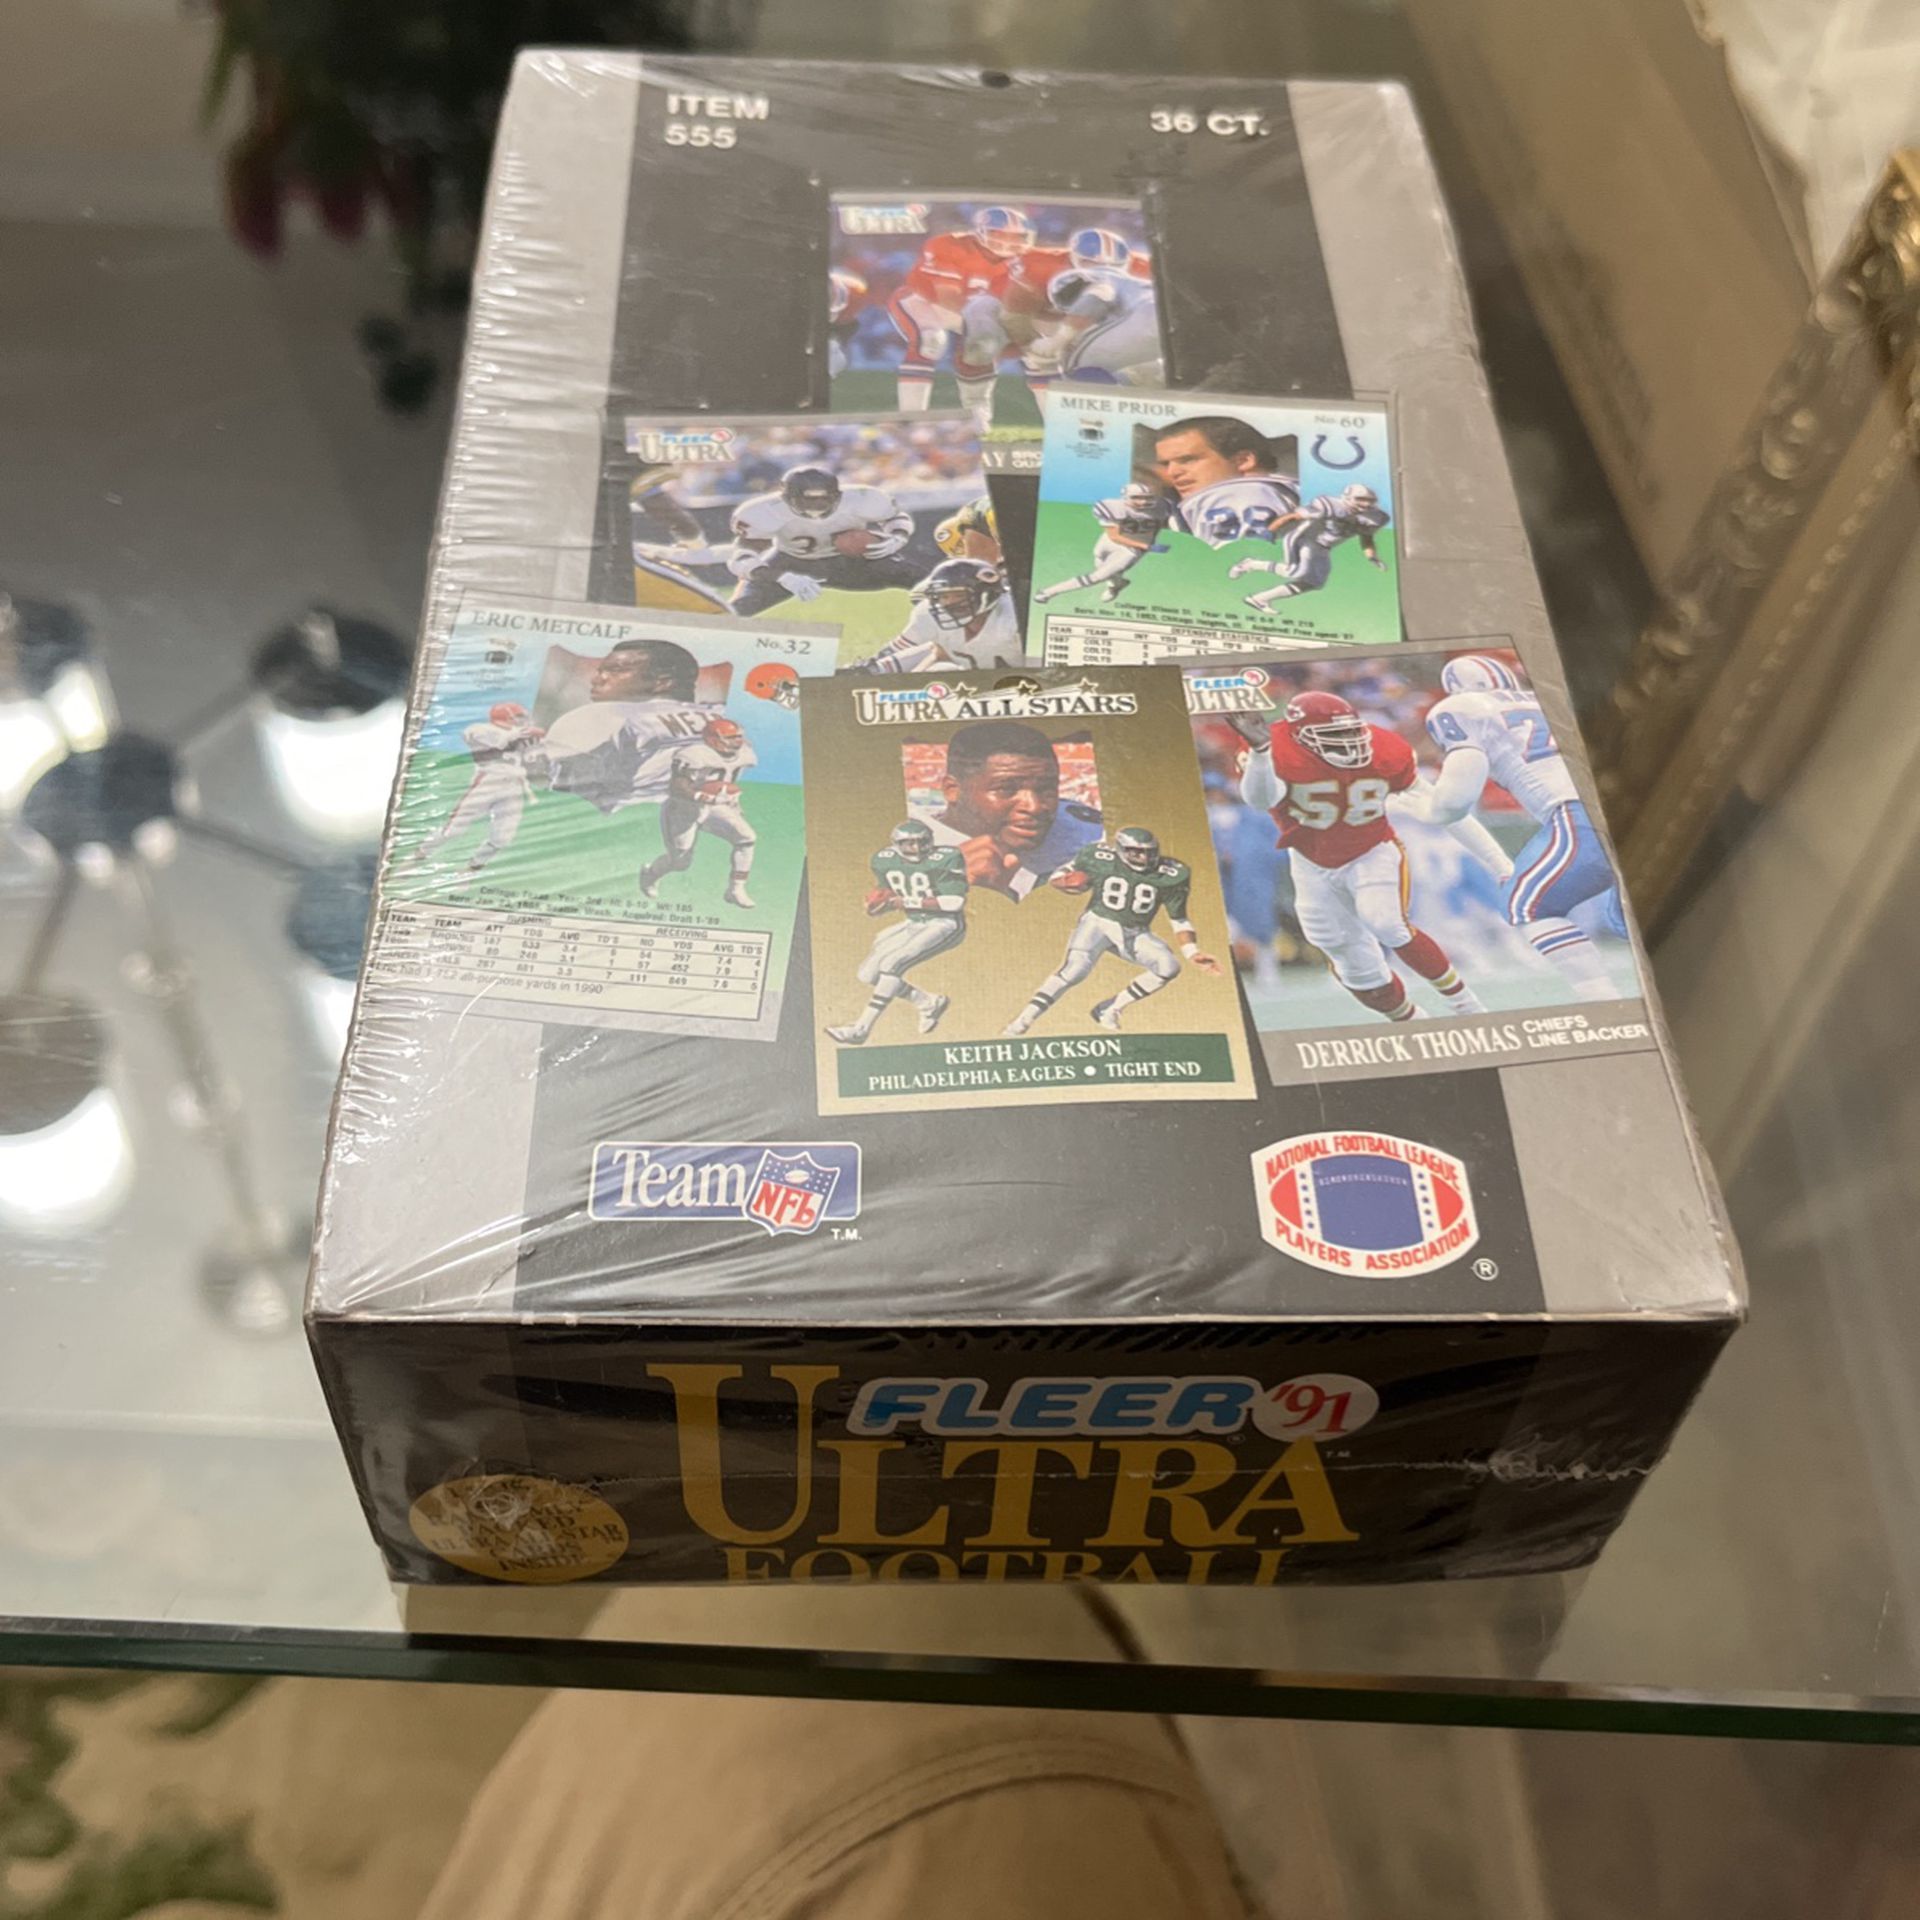 Wow ! Nice Value 1991 Ultra Football Card Packs 75 Cents Each Buy 12 Get1 Pack Free That’s 13 Packs For $9 Or 69 Cents Each In Larger Volume Farve Rc?